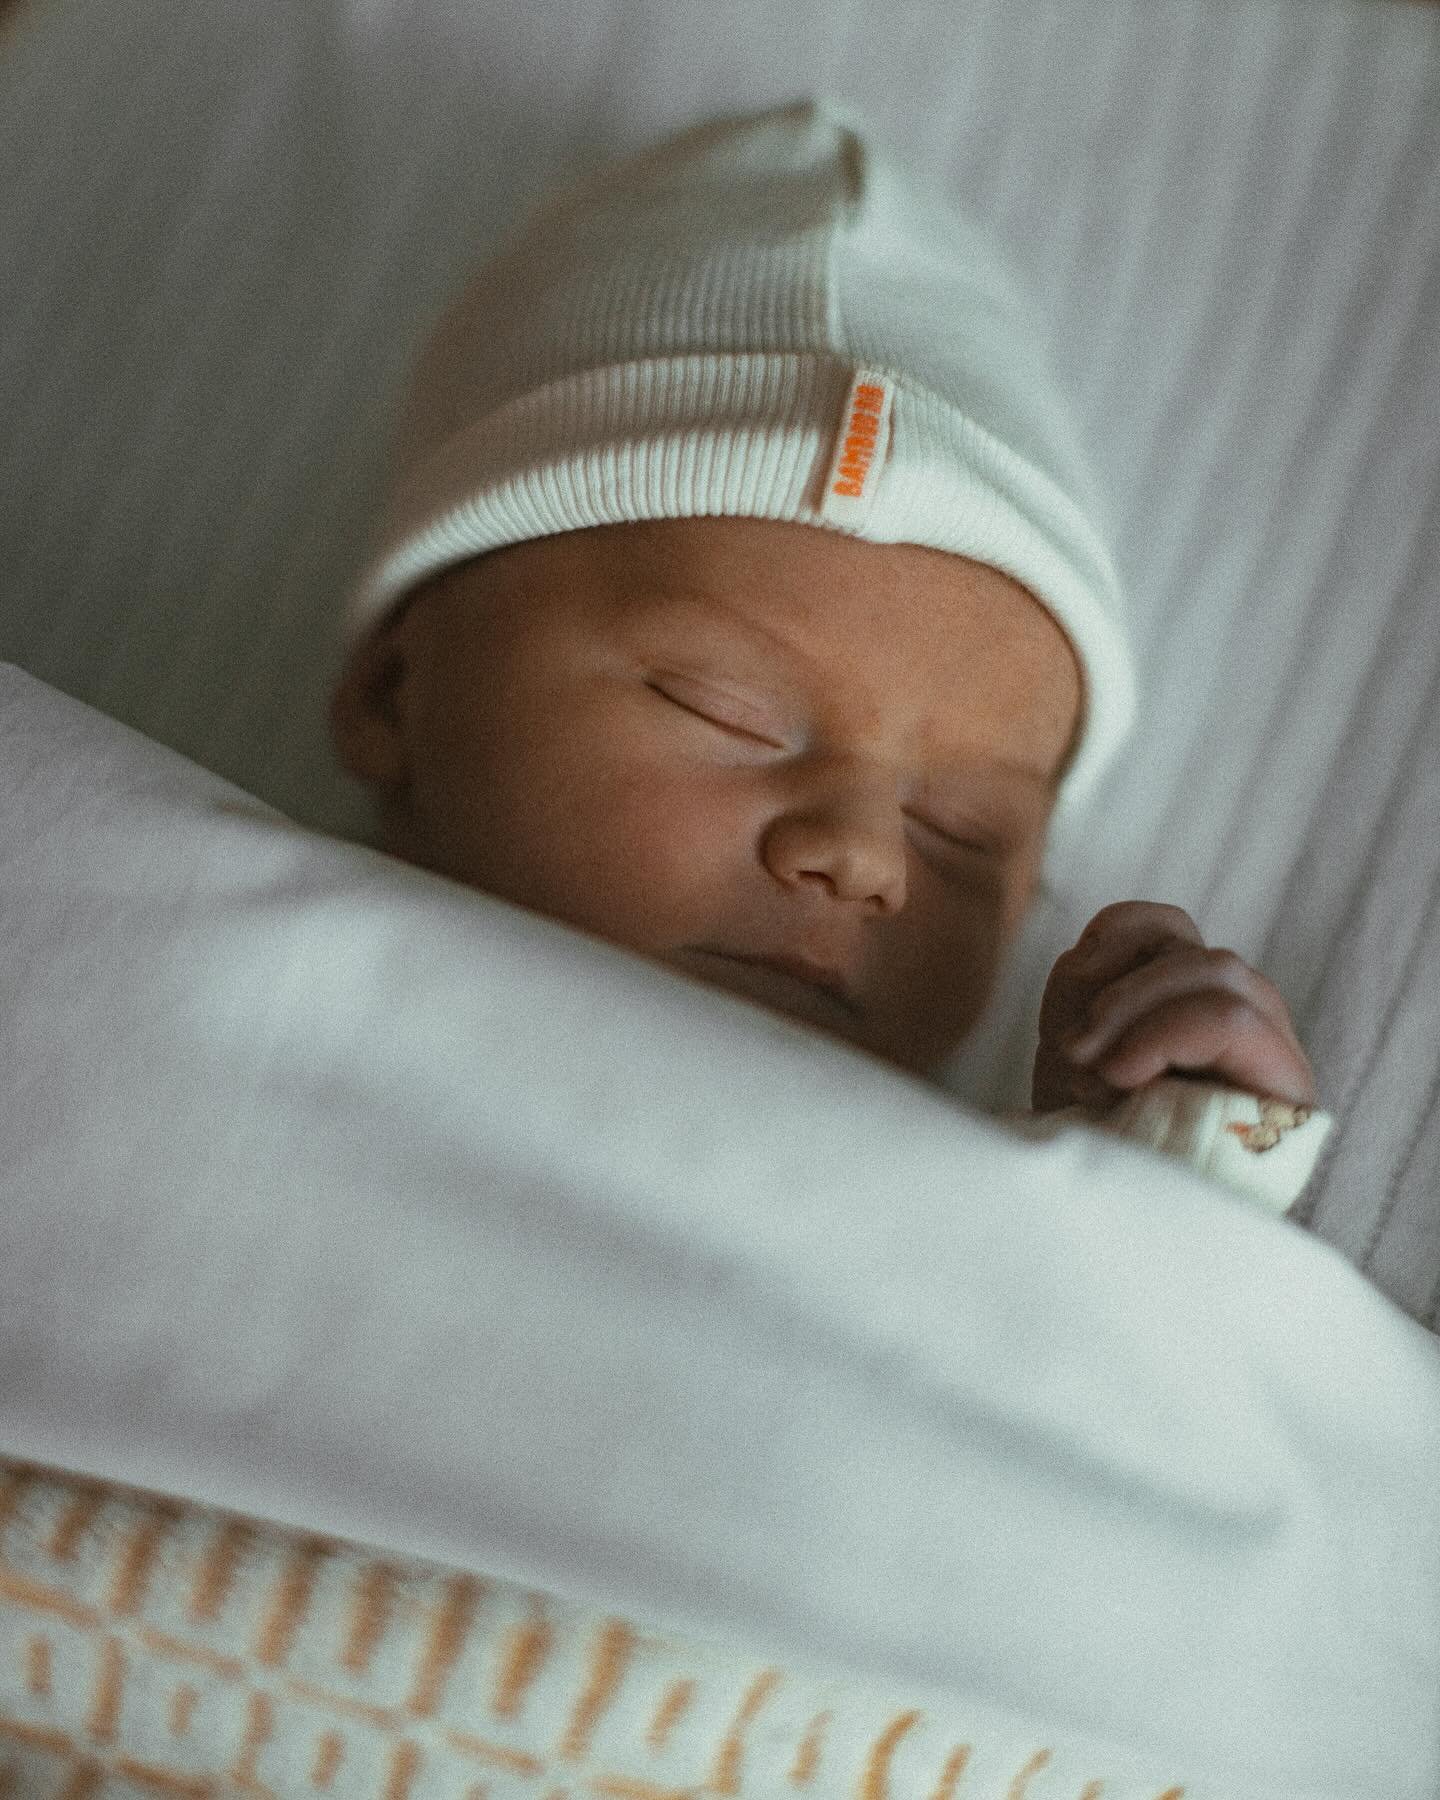 Welcome Riley Graham van der Wens 👶🍼
⠀⠀⠀⠀⠀⠀⠀⠀⠀
We are very proud to tell you that our son, Riley Graham van der Wens, was born on Saturday, April 20, 2024.
⠀⠀⠀⠀⠀⠀⠀⠀⠀
Riley is a strong, healthy boy with a wonderful future ahead of him! He can do, be